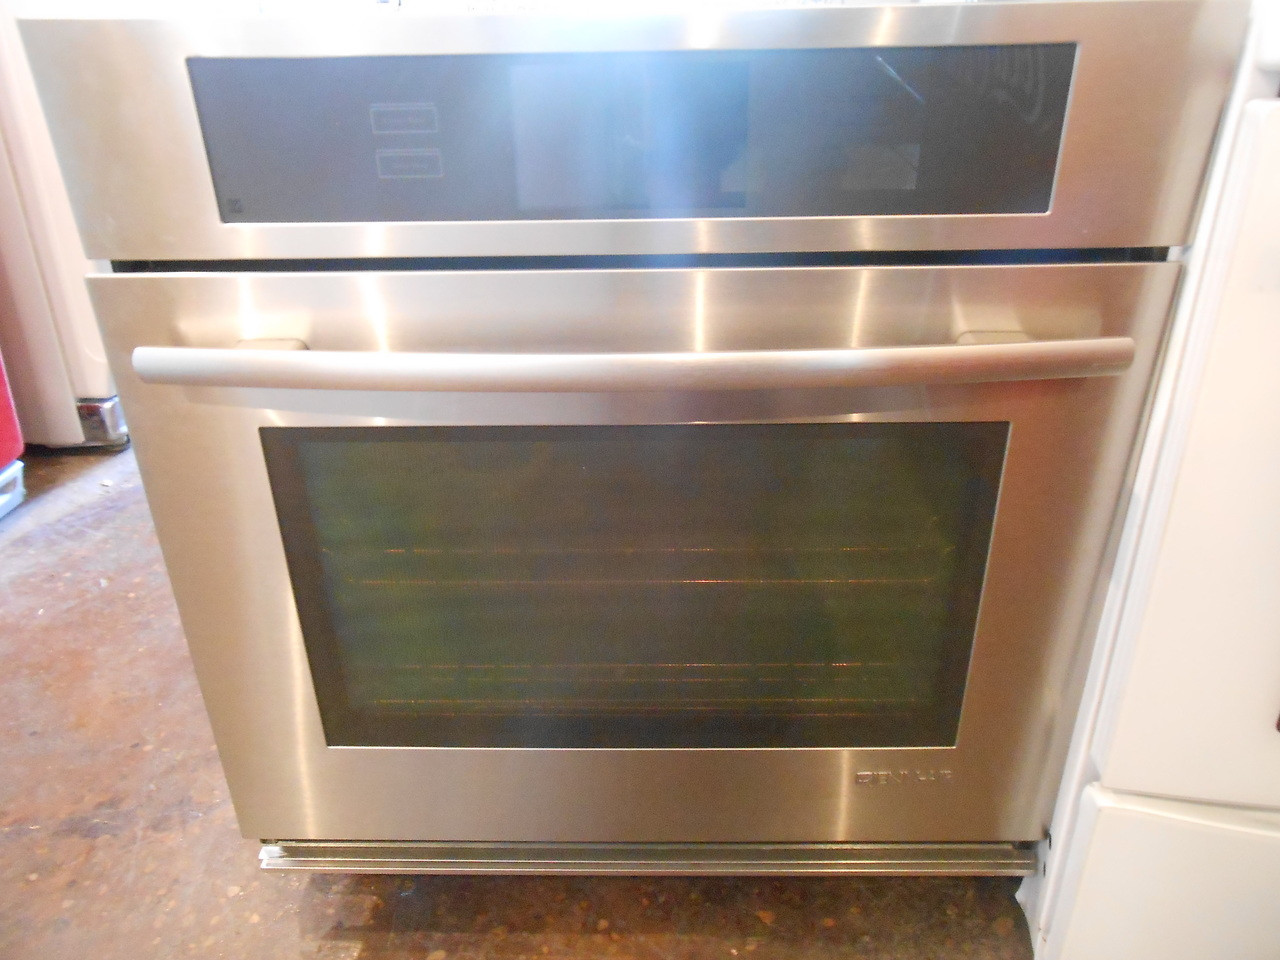 Jenn-Air Oven 30 Inch Wall Oven with 5.0 Cubic foot Capacity